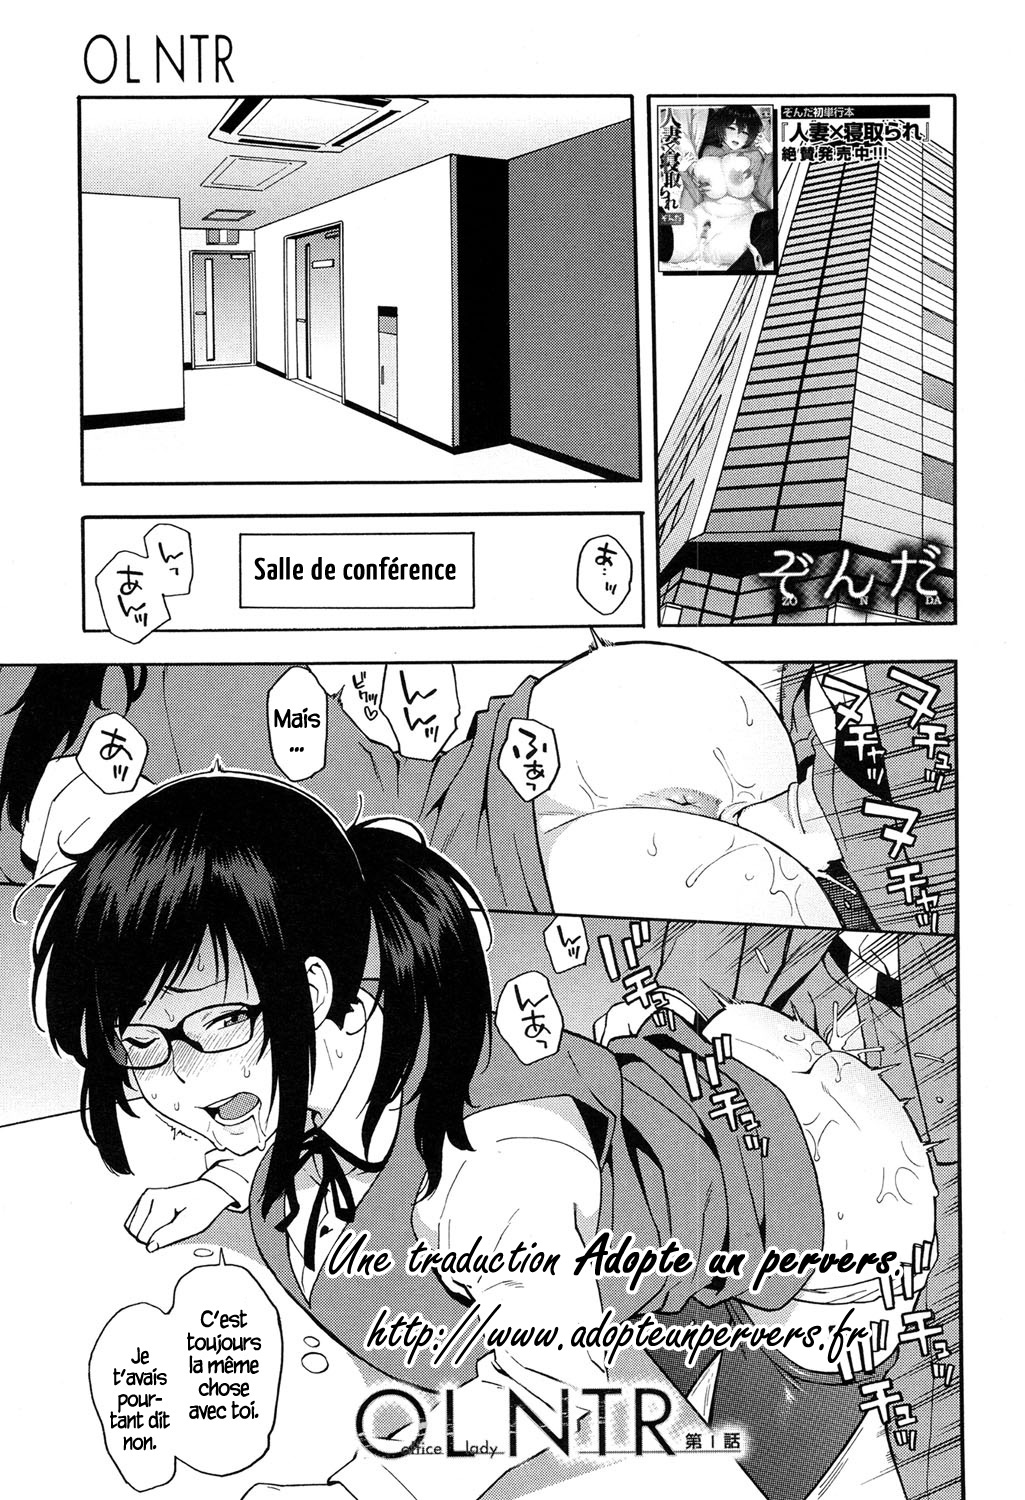 [Zonda] OL NTR [Complet] [French] Hentai Comic